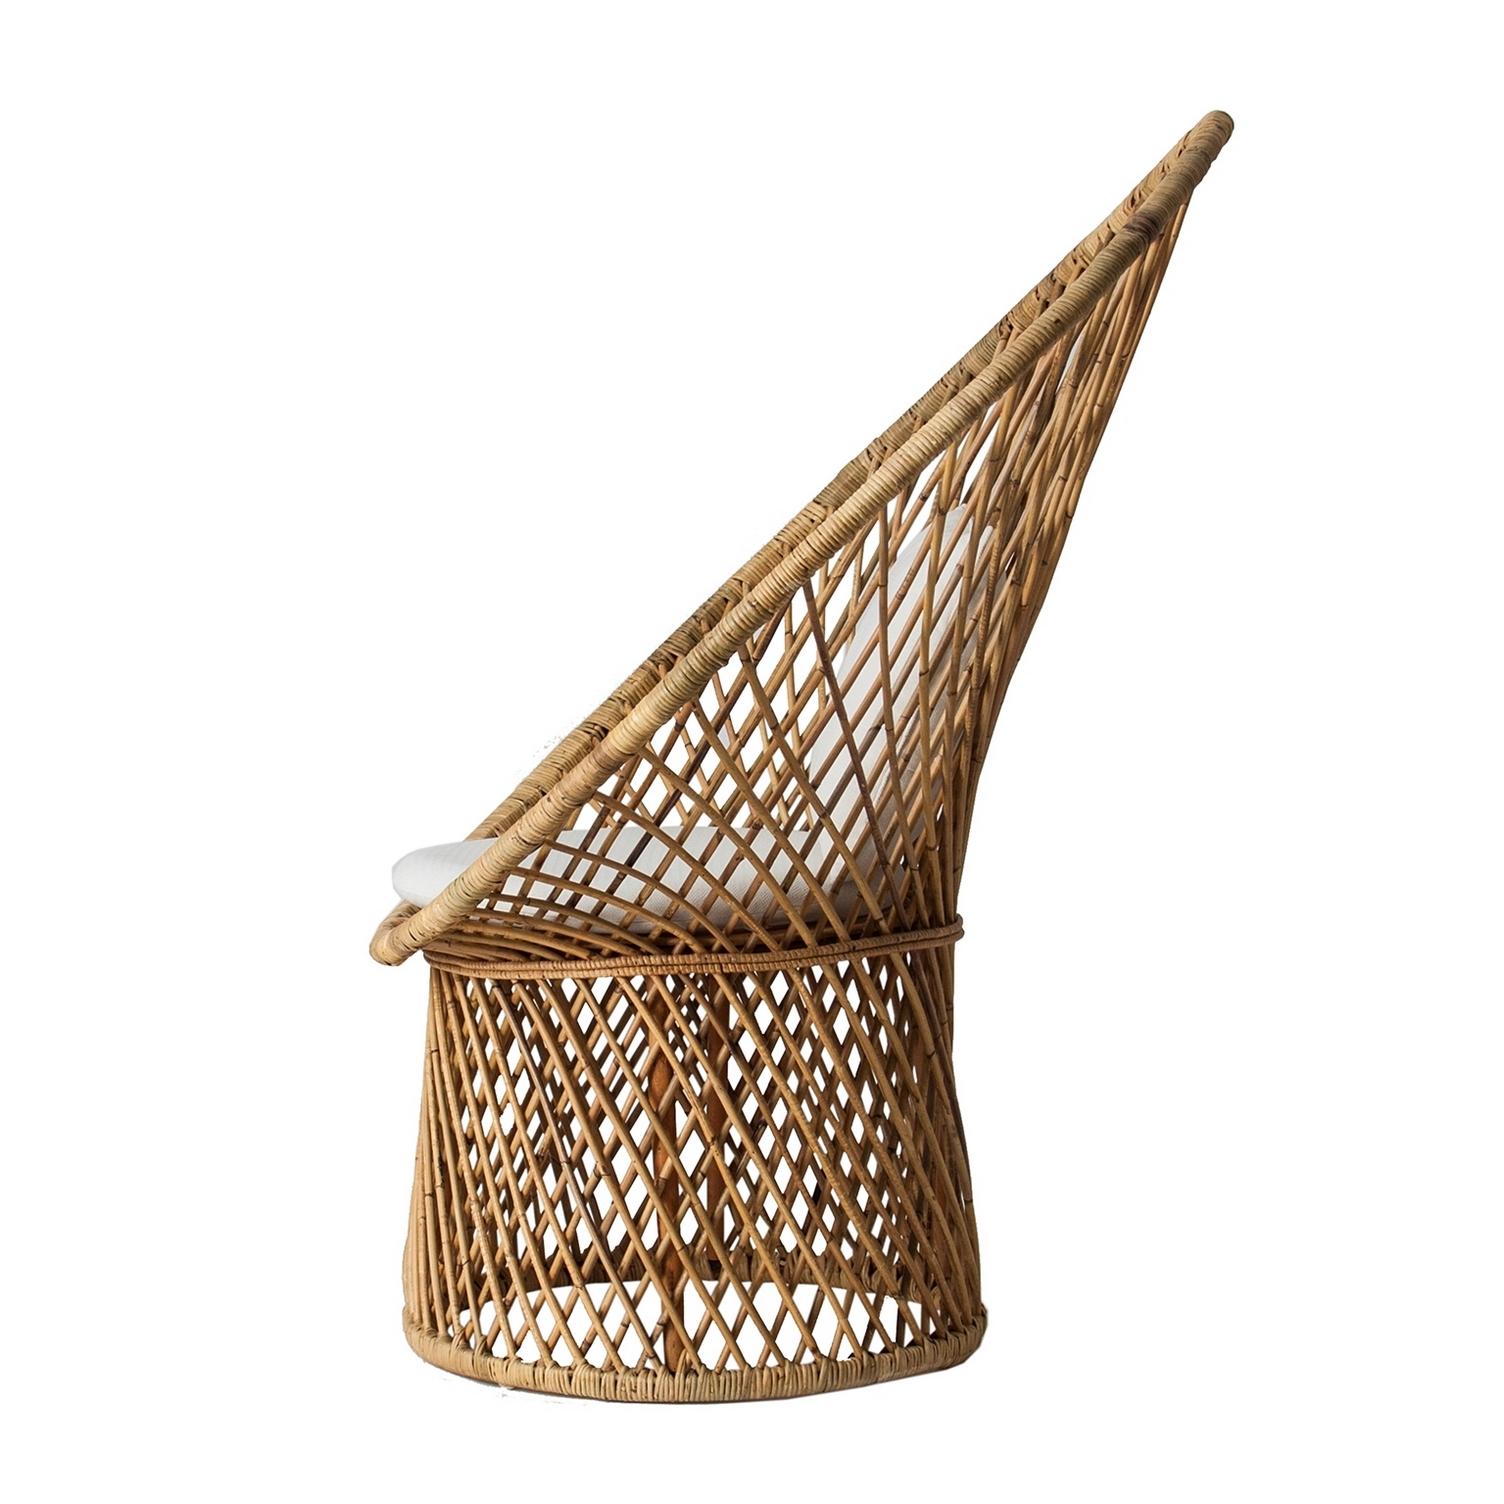 Italian Design armchair with a natural rattan airy structure.